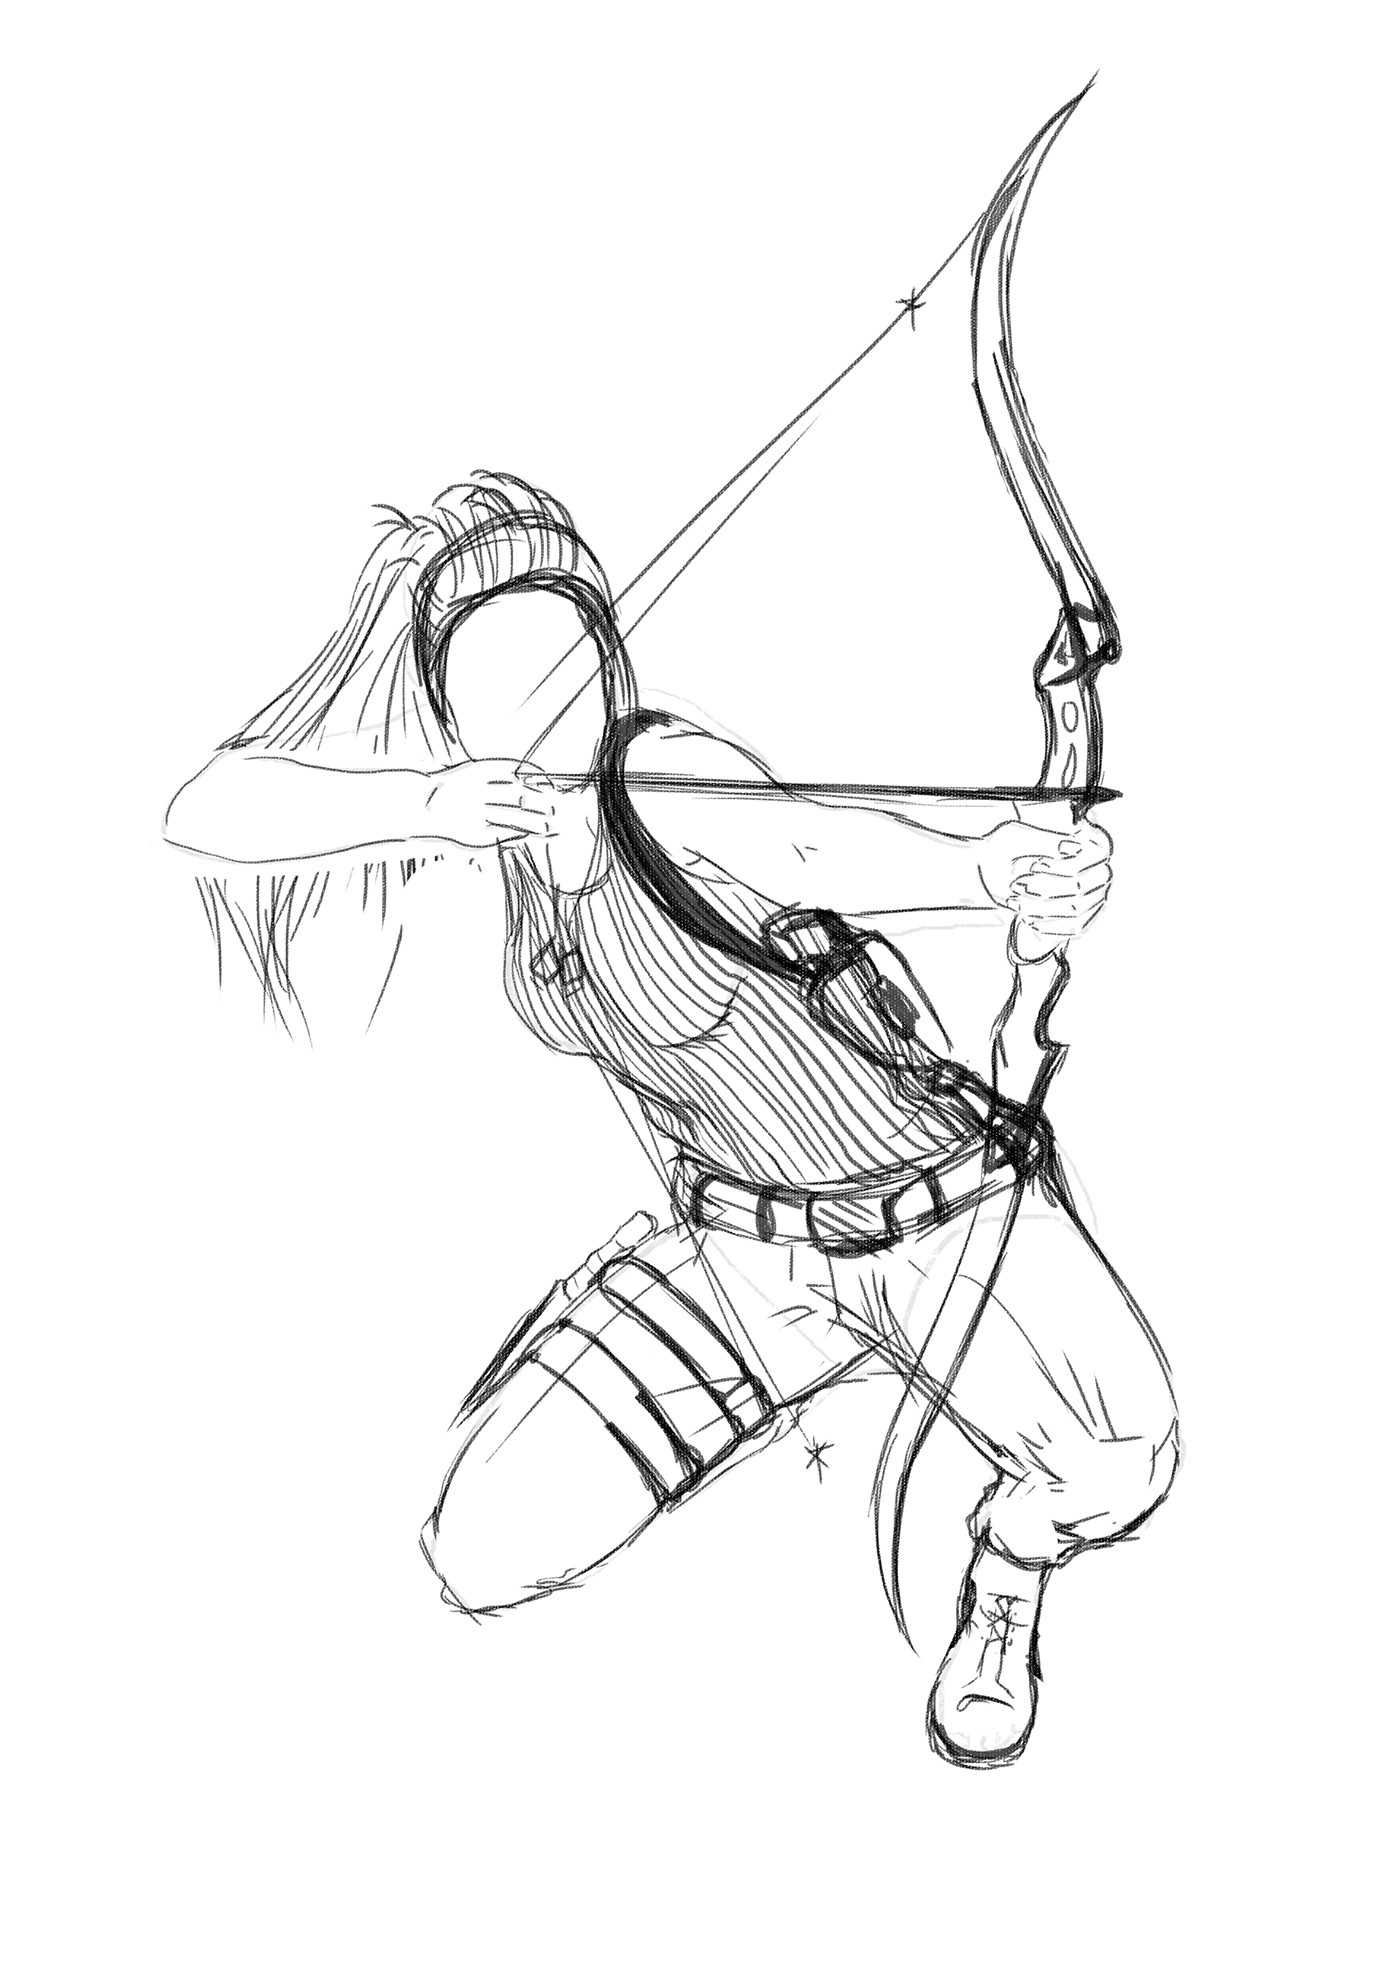 Archer Pose Reference Drawing and Sketch Collection for Artists Art